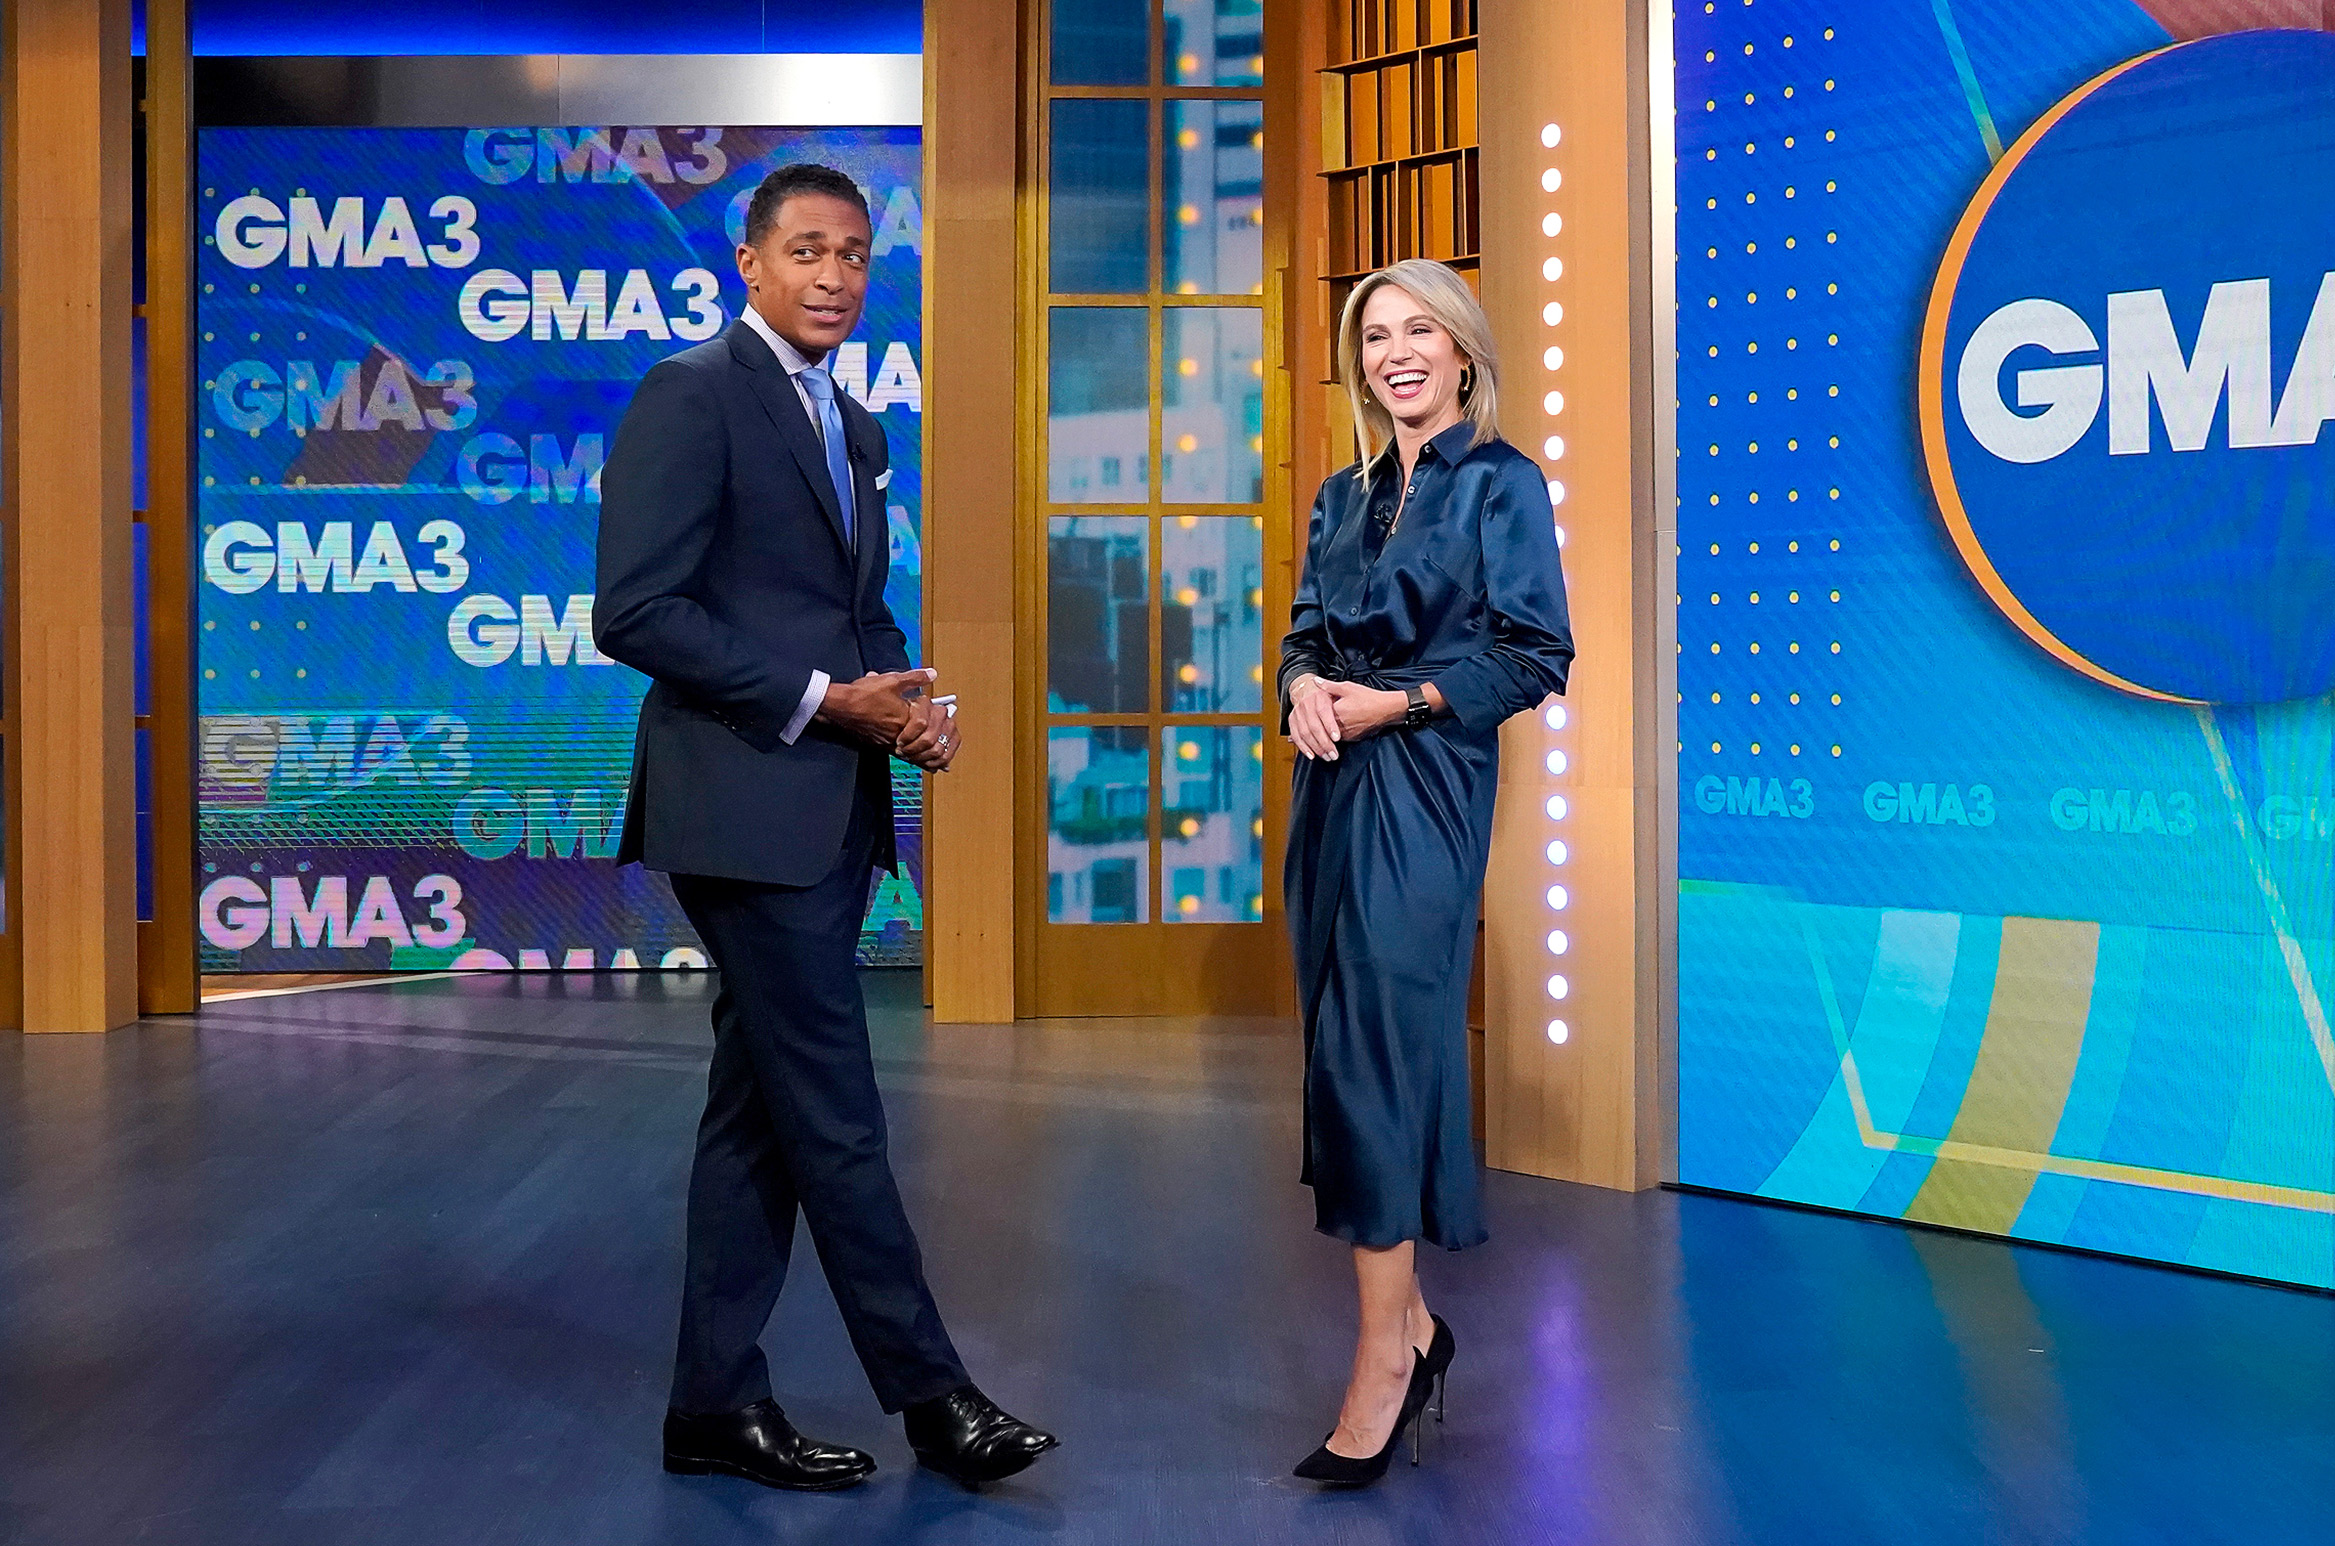 Amy Robach, T.J. Holmes Are Out at 'GMA3' Amid Affair Scandal